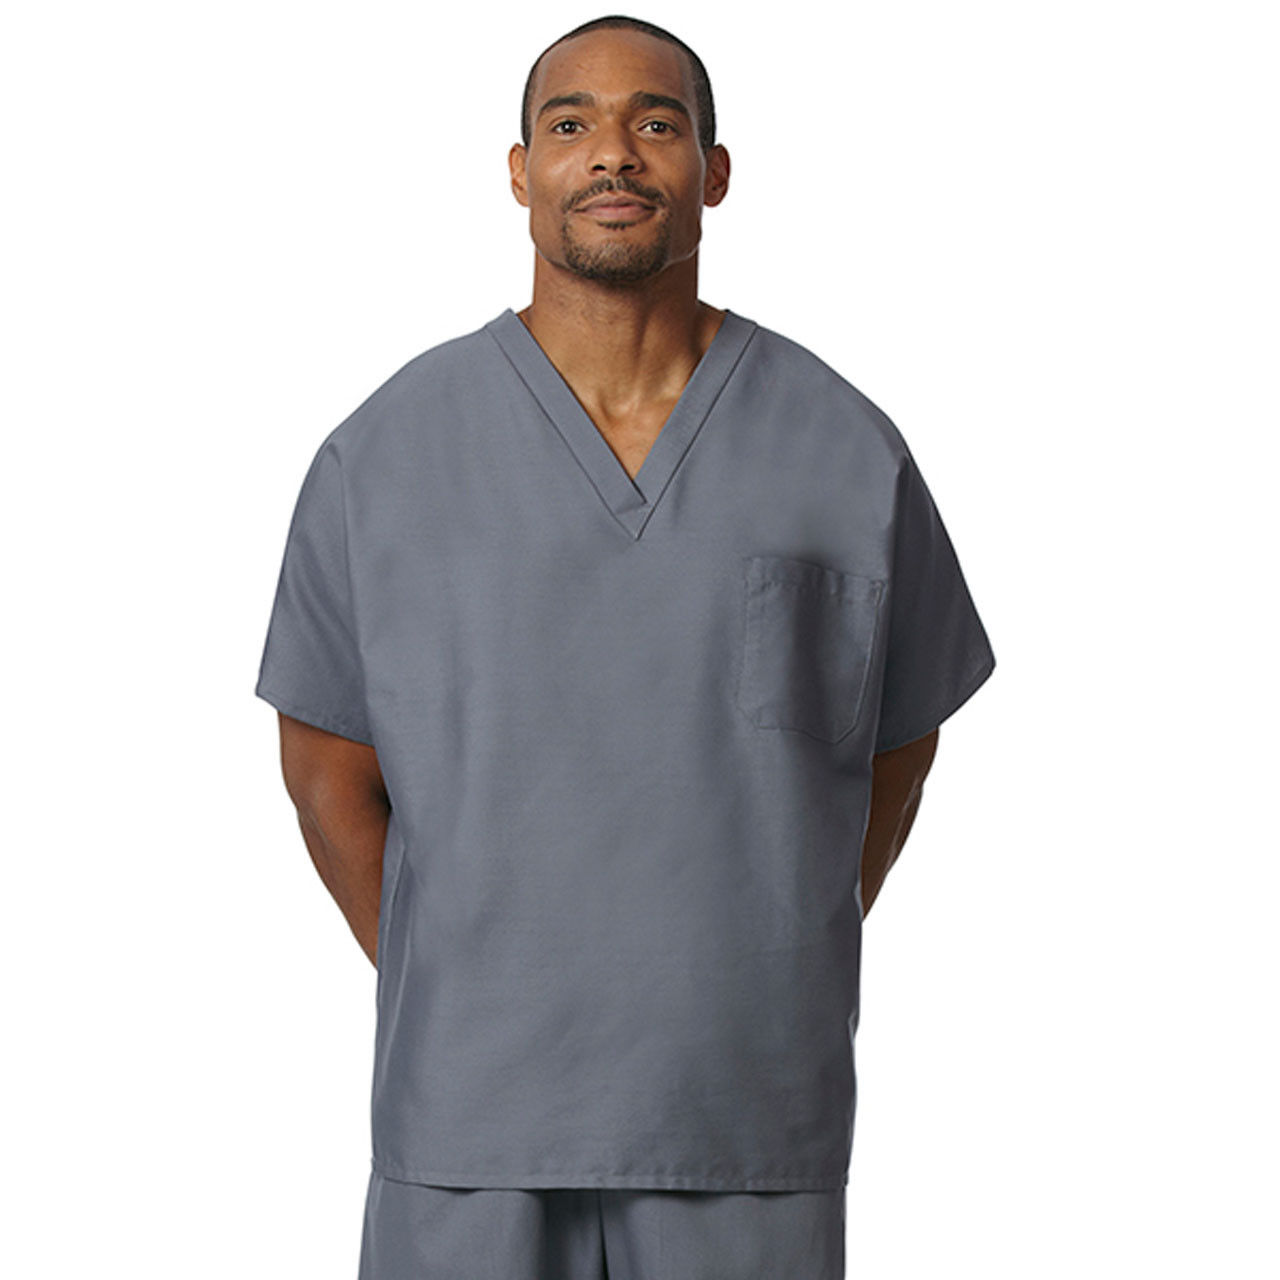 What is the intended body type for the Womens and Mens Tall Scrub Tops?